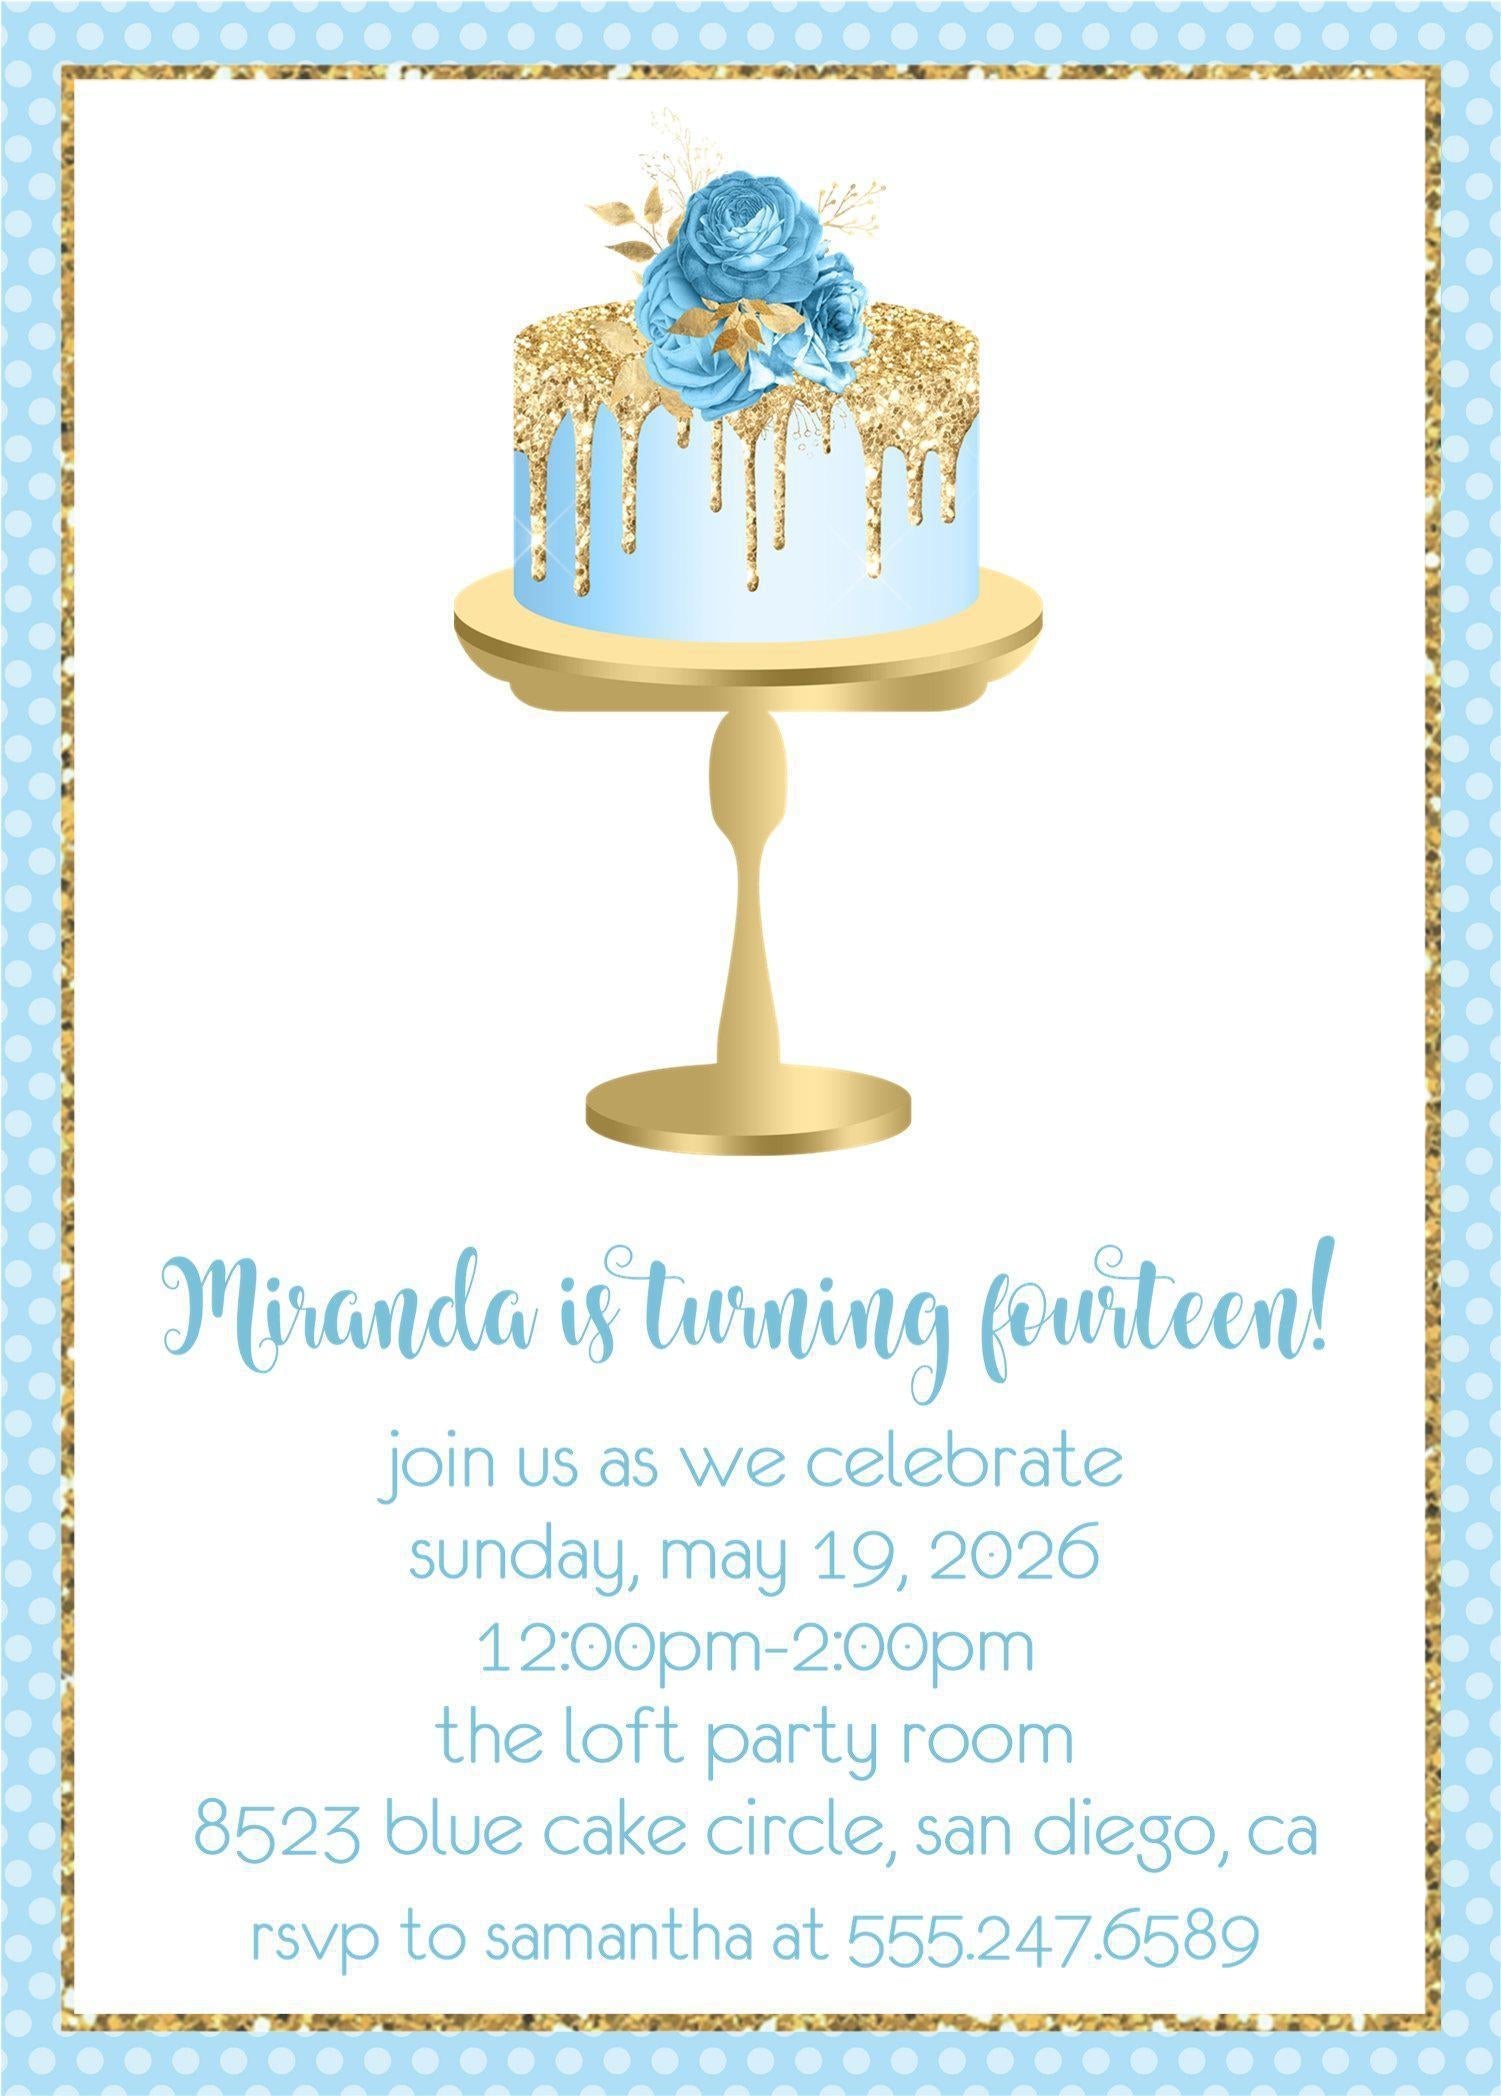 Pastel Blue And Gold Cake Birthday Party Invitations